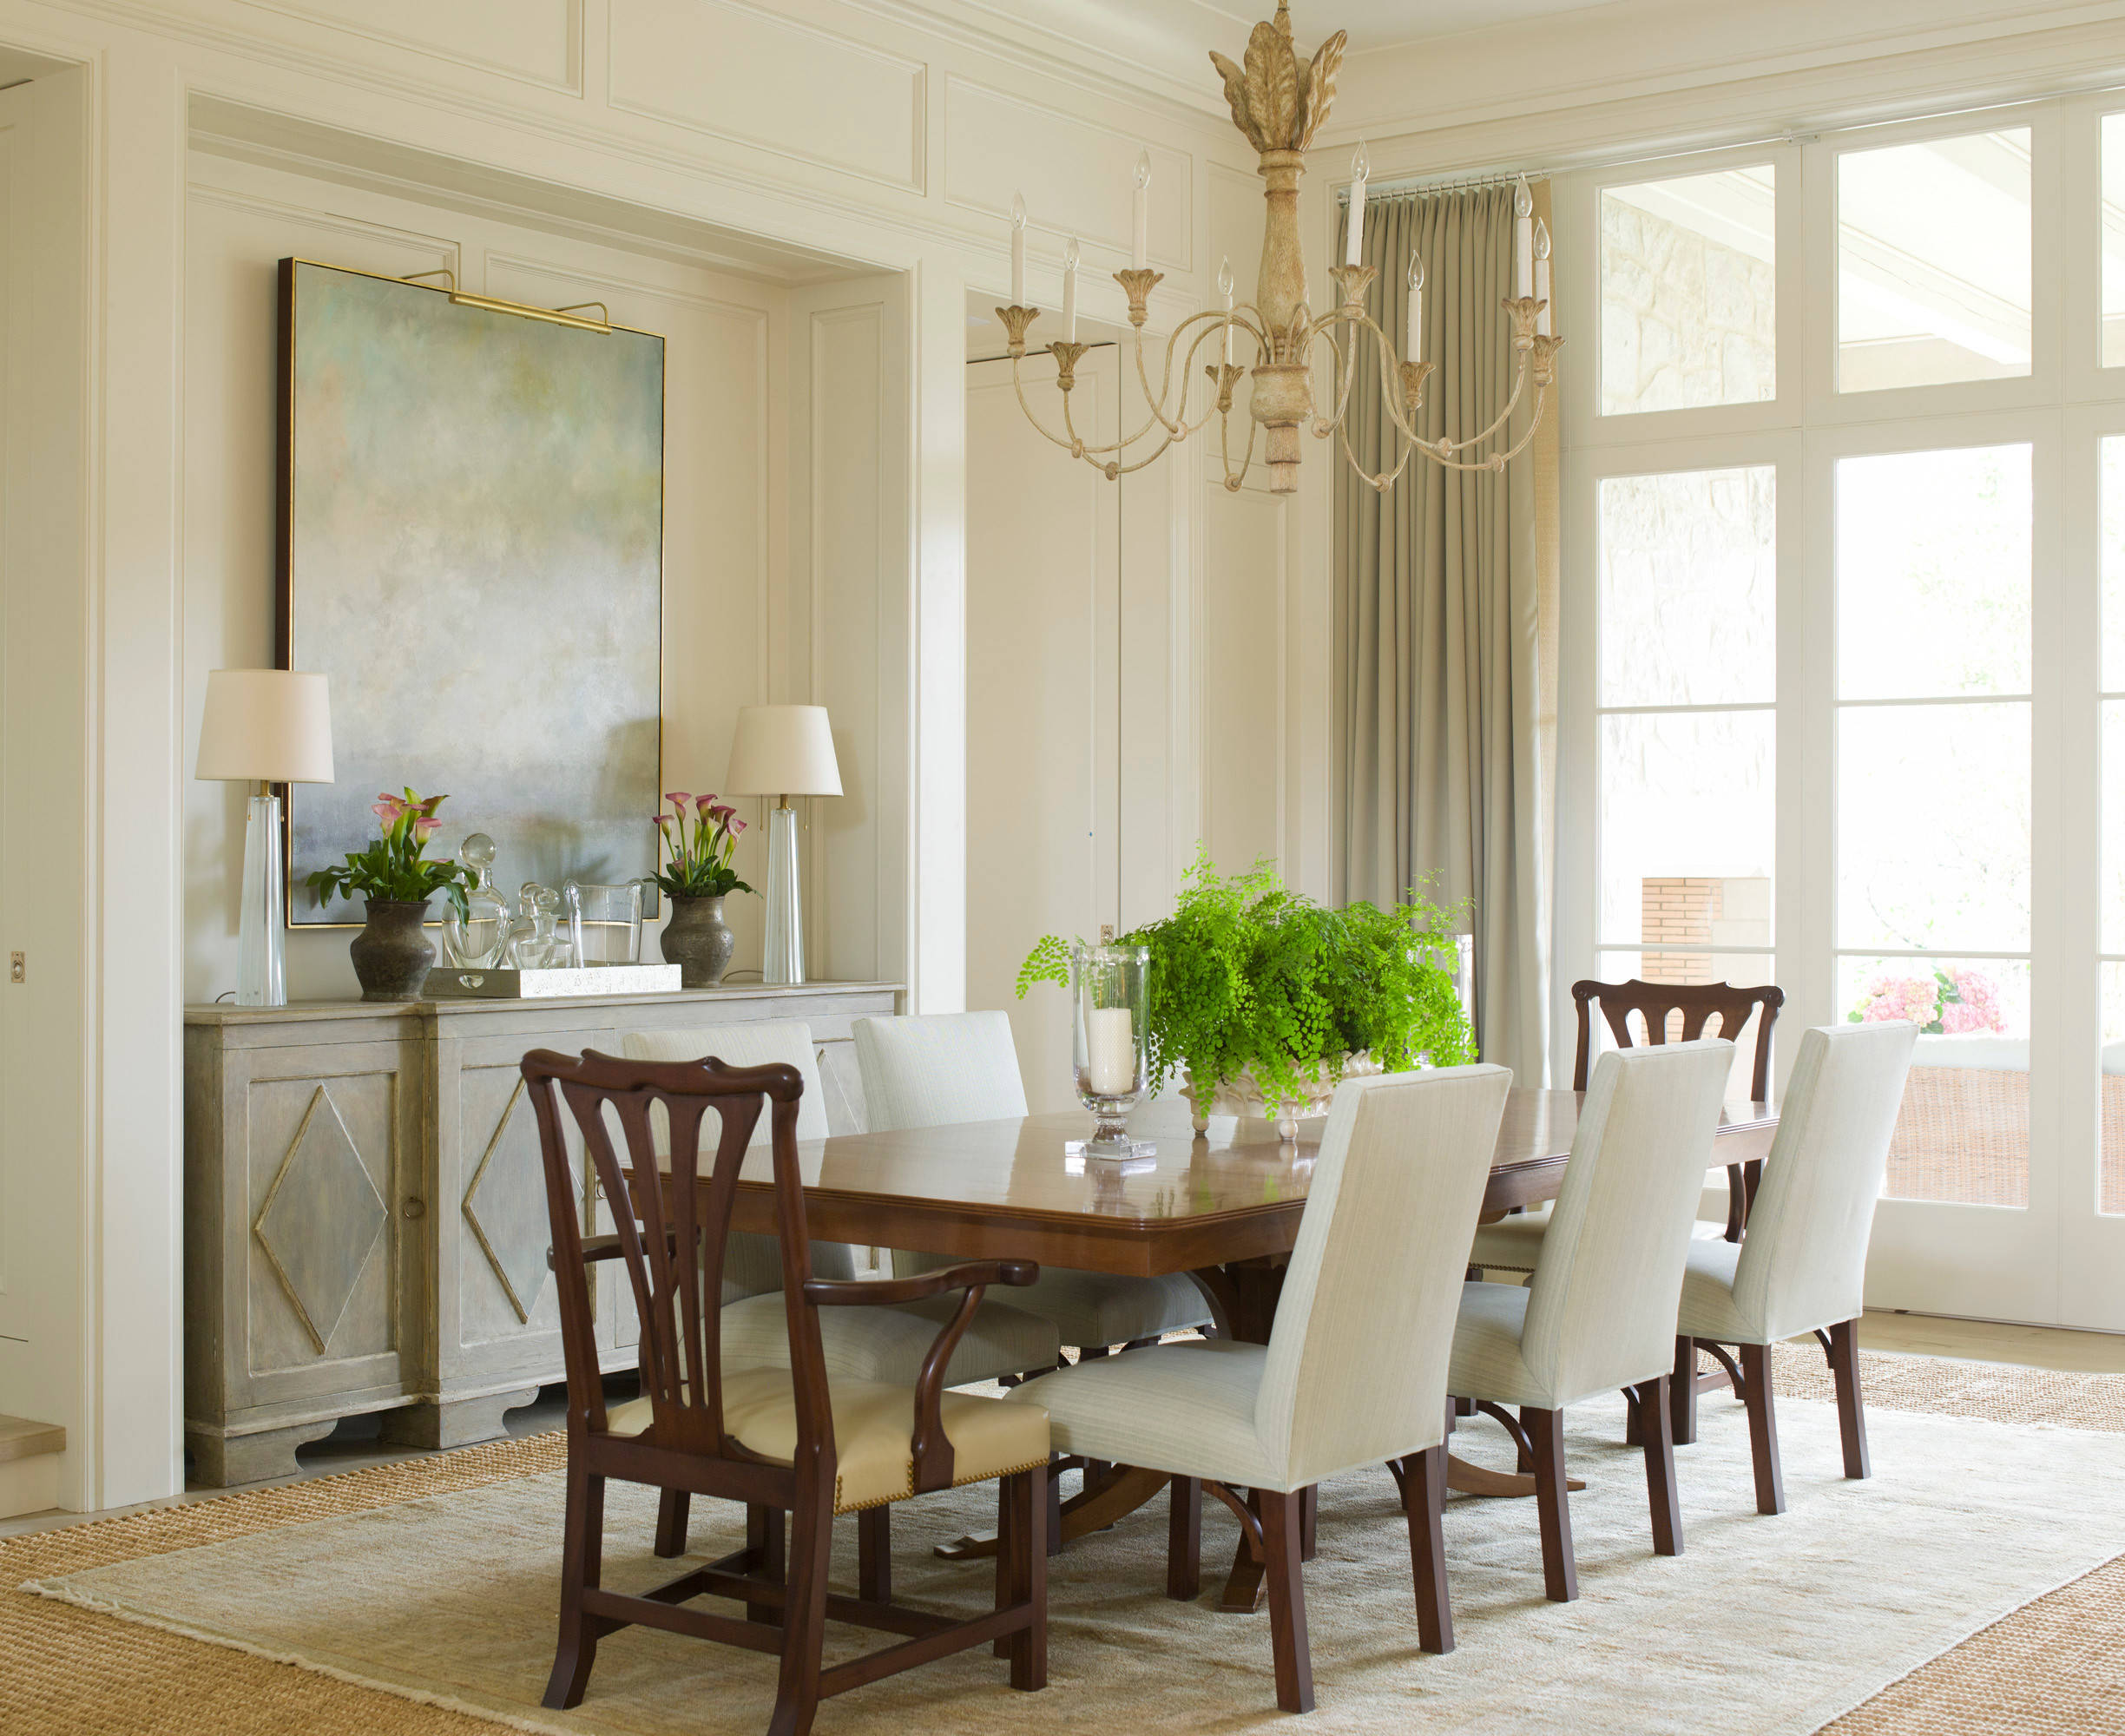 Dining room featured in home tour with a traditional sophistication design